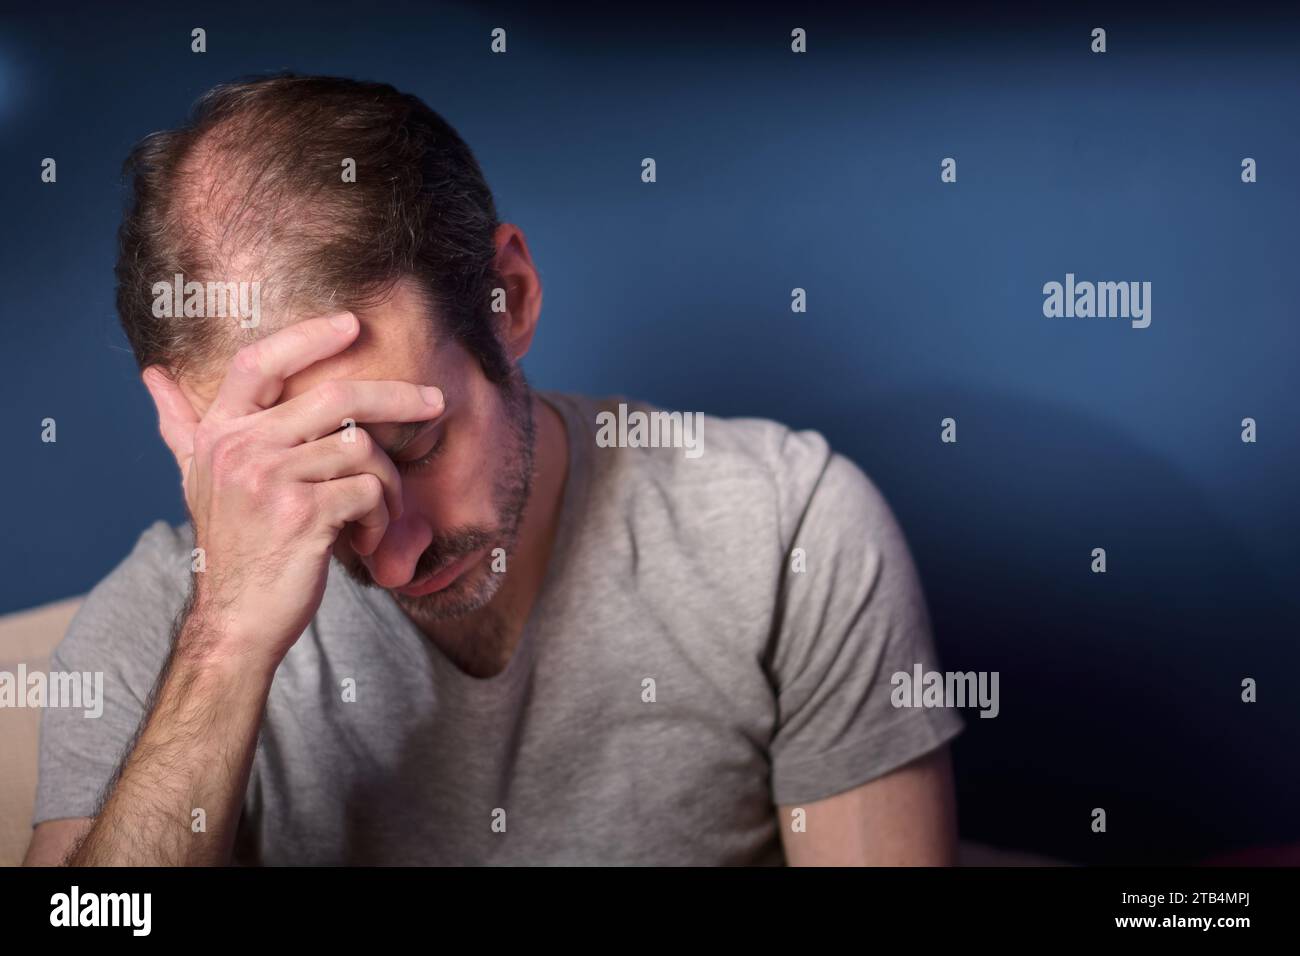 Young caucasian 30 year old man with short beard holding his head. Concept of depression, loss and grief. Adult person expressing stress and anxiety. Stock Photo